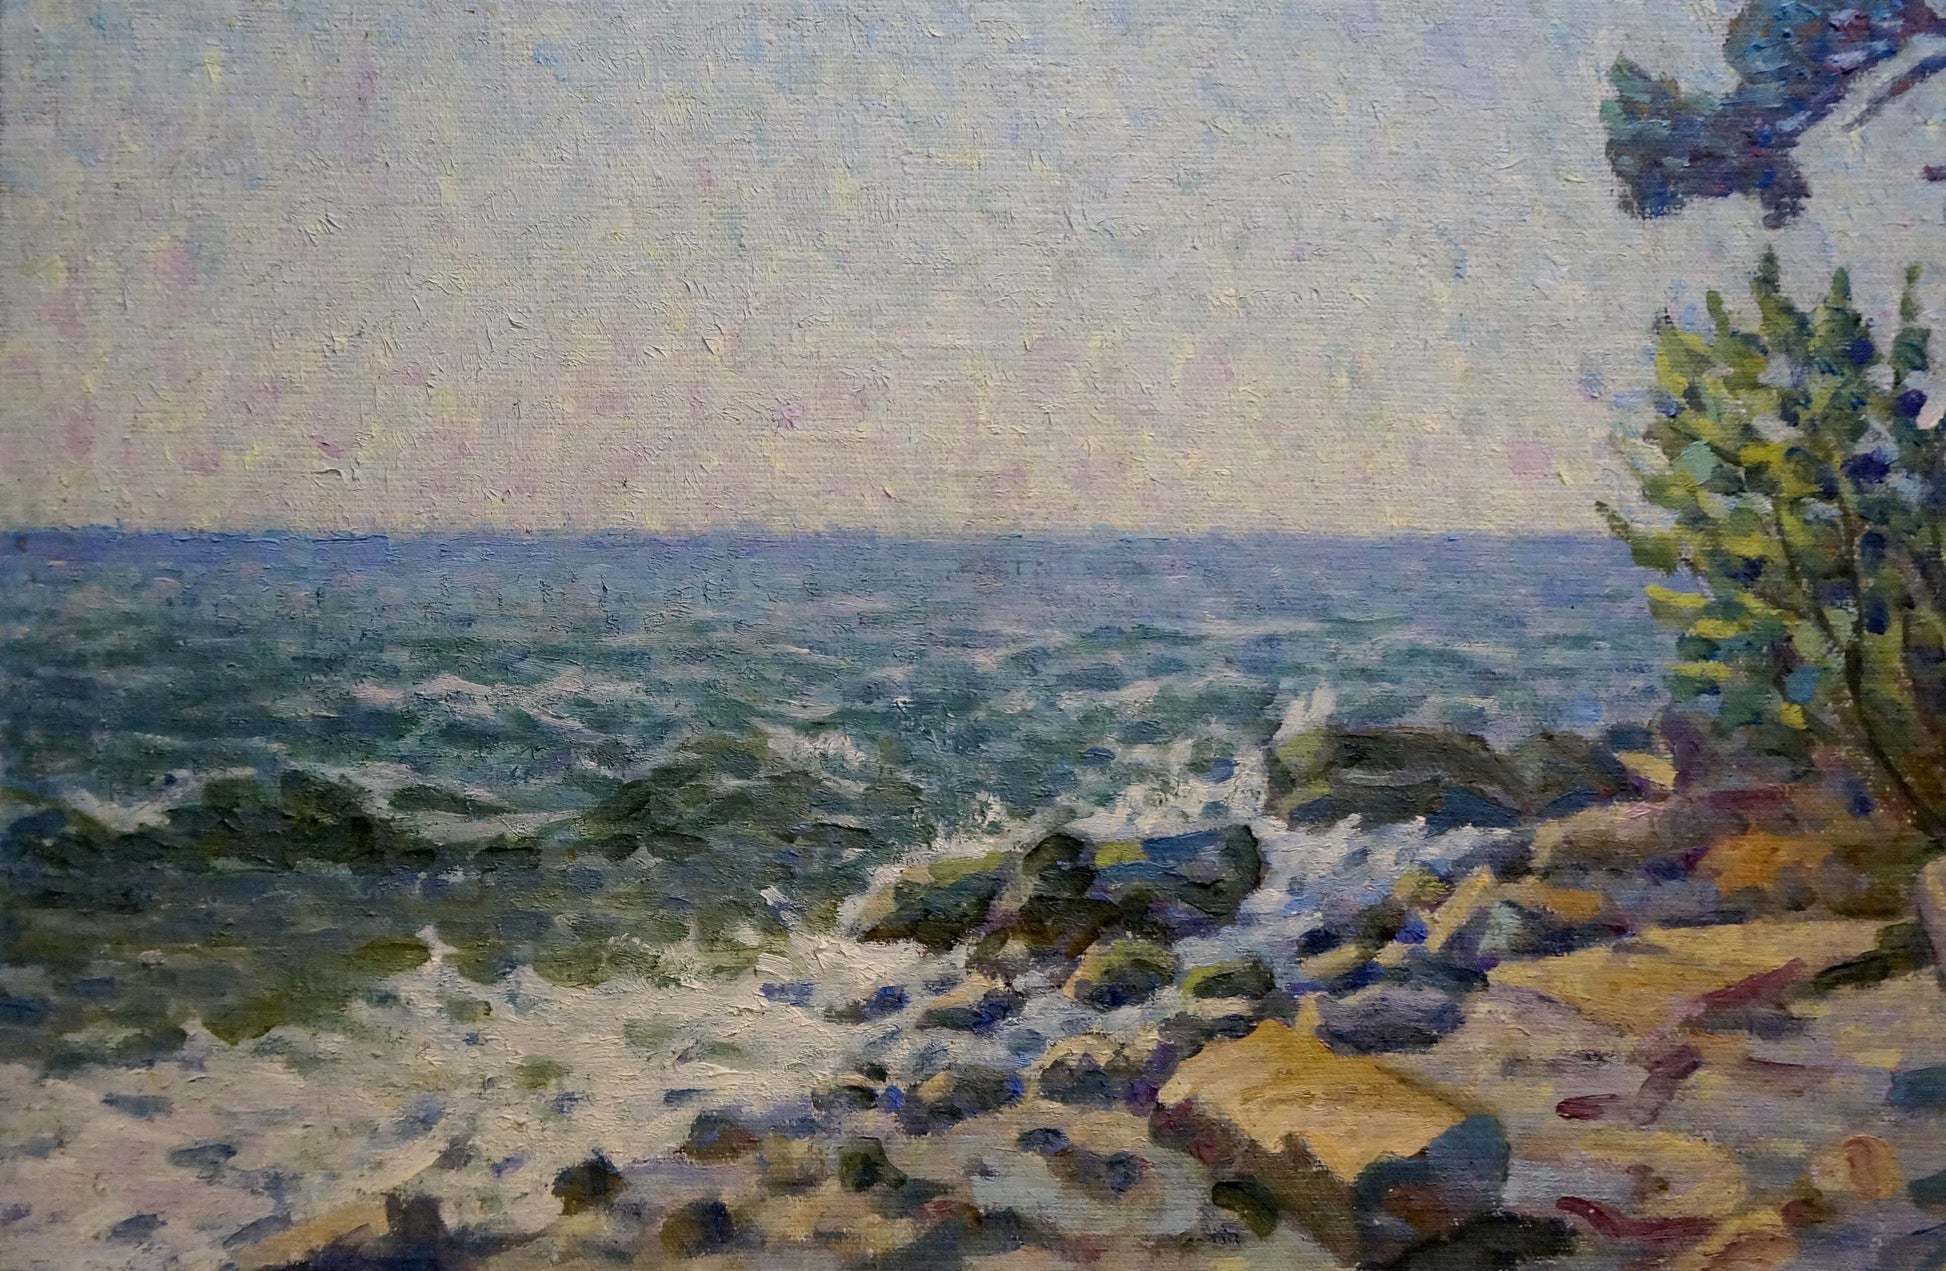 Oil painting depicting scenes "Off the Coast" by Petro Yevlampiyovych Sabadysh